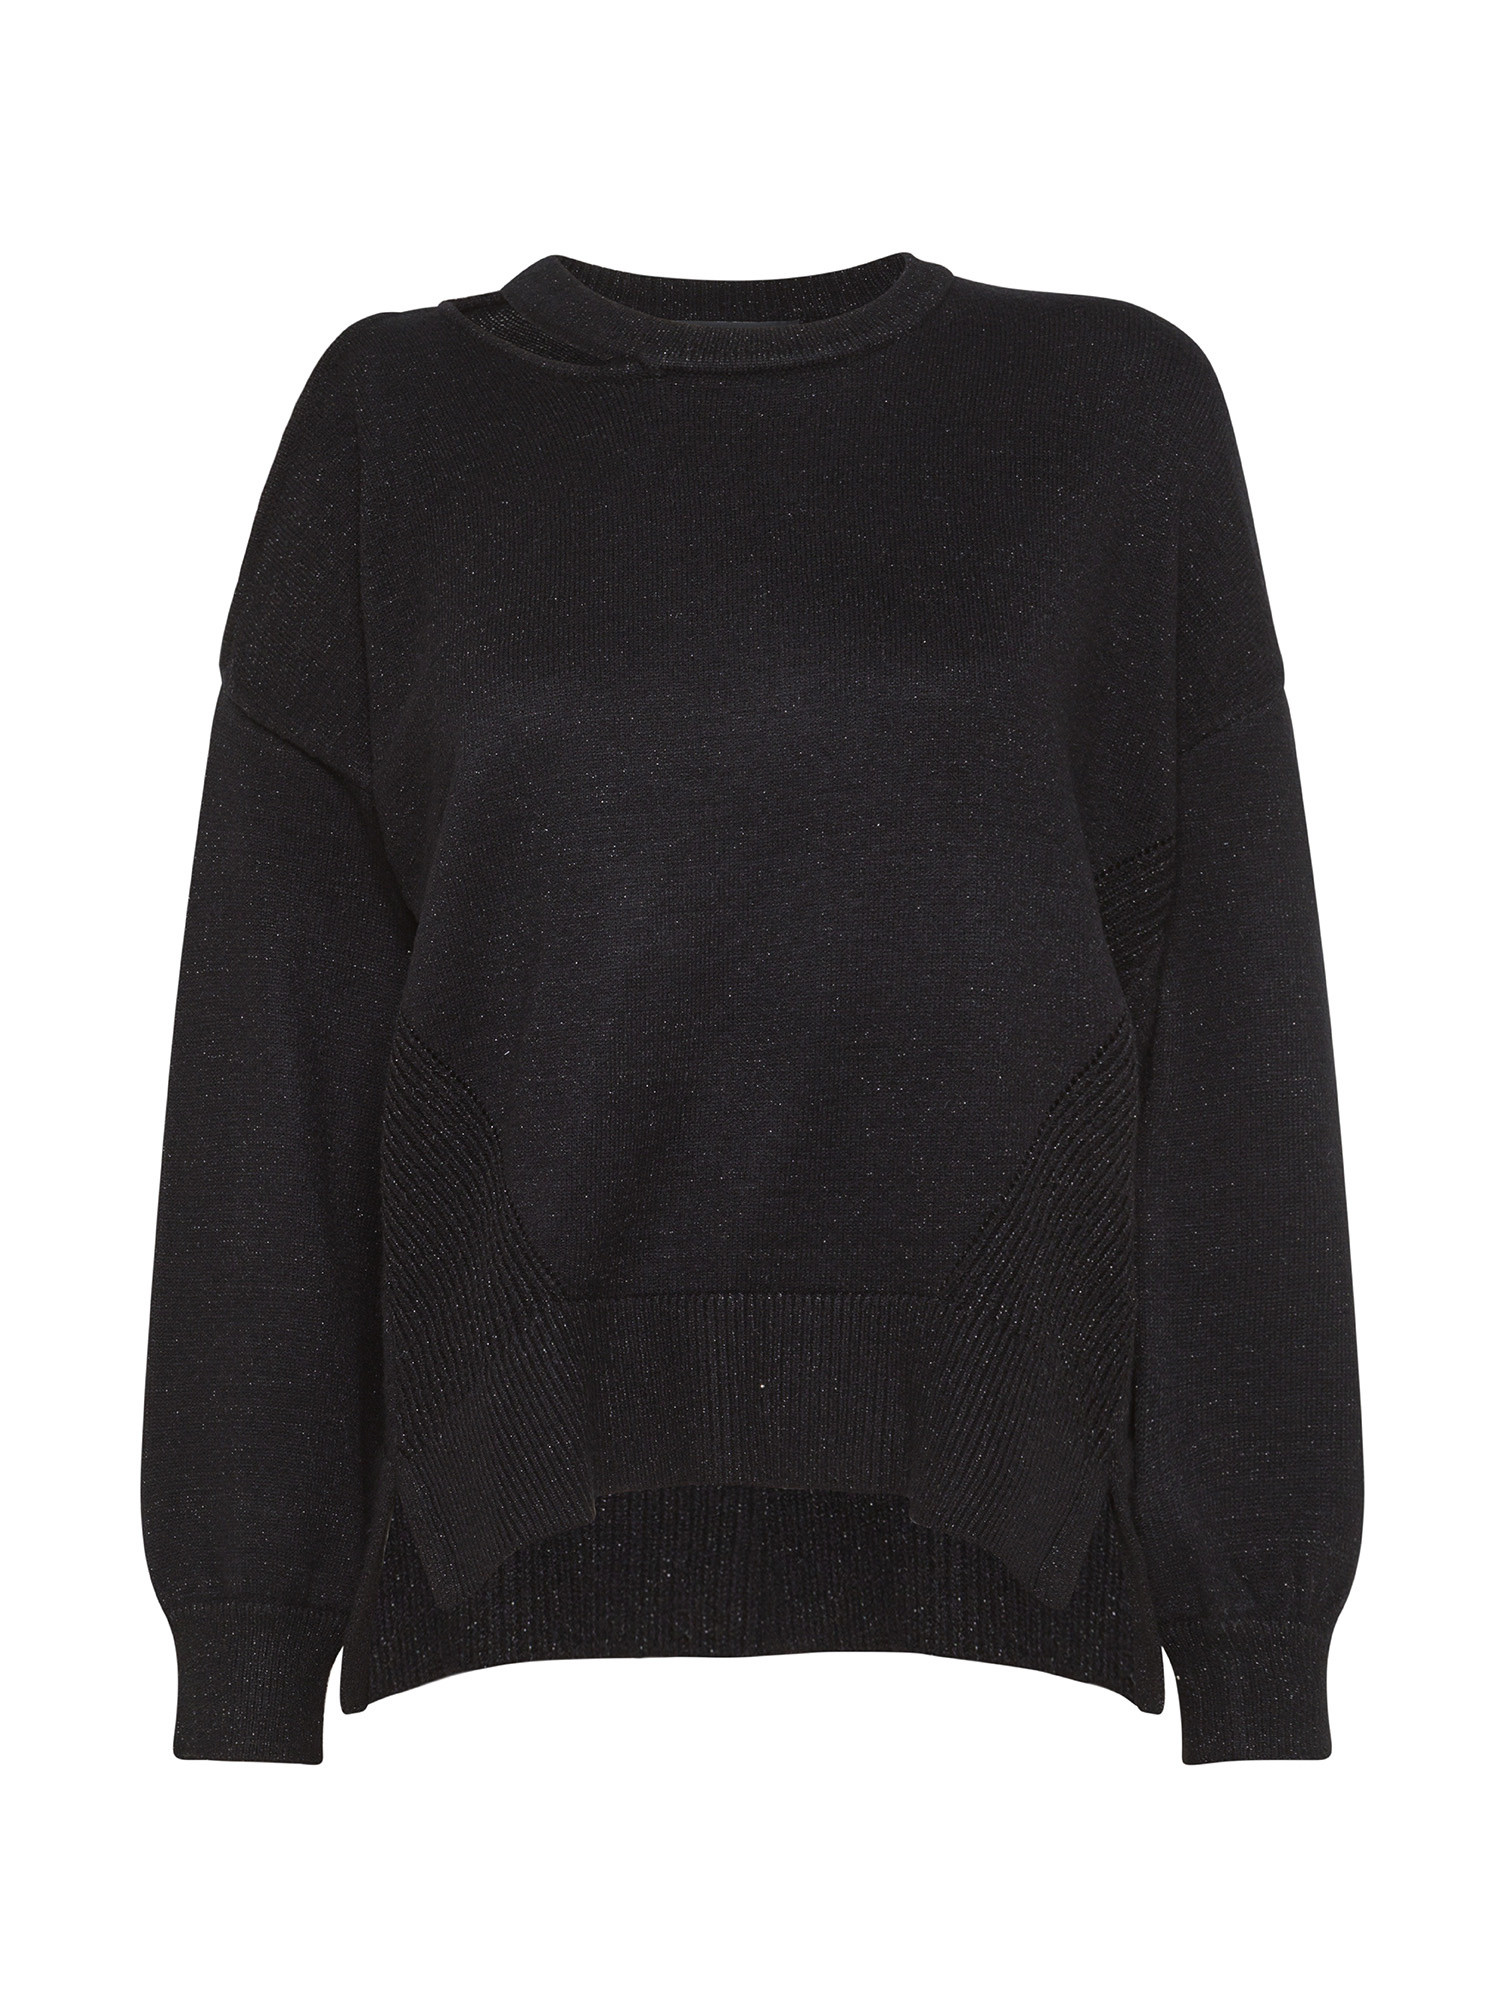 DKNY - Sweater with cut out details, Black, large image number 0